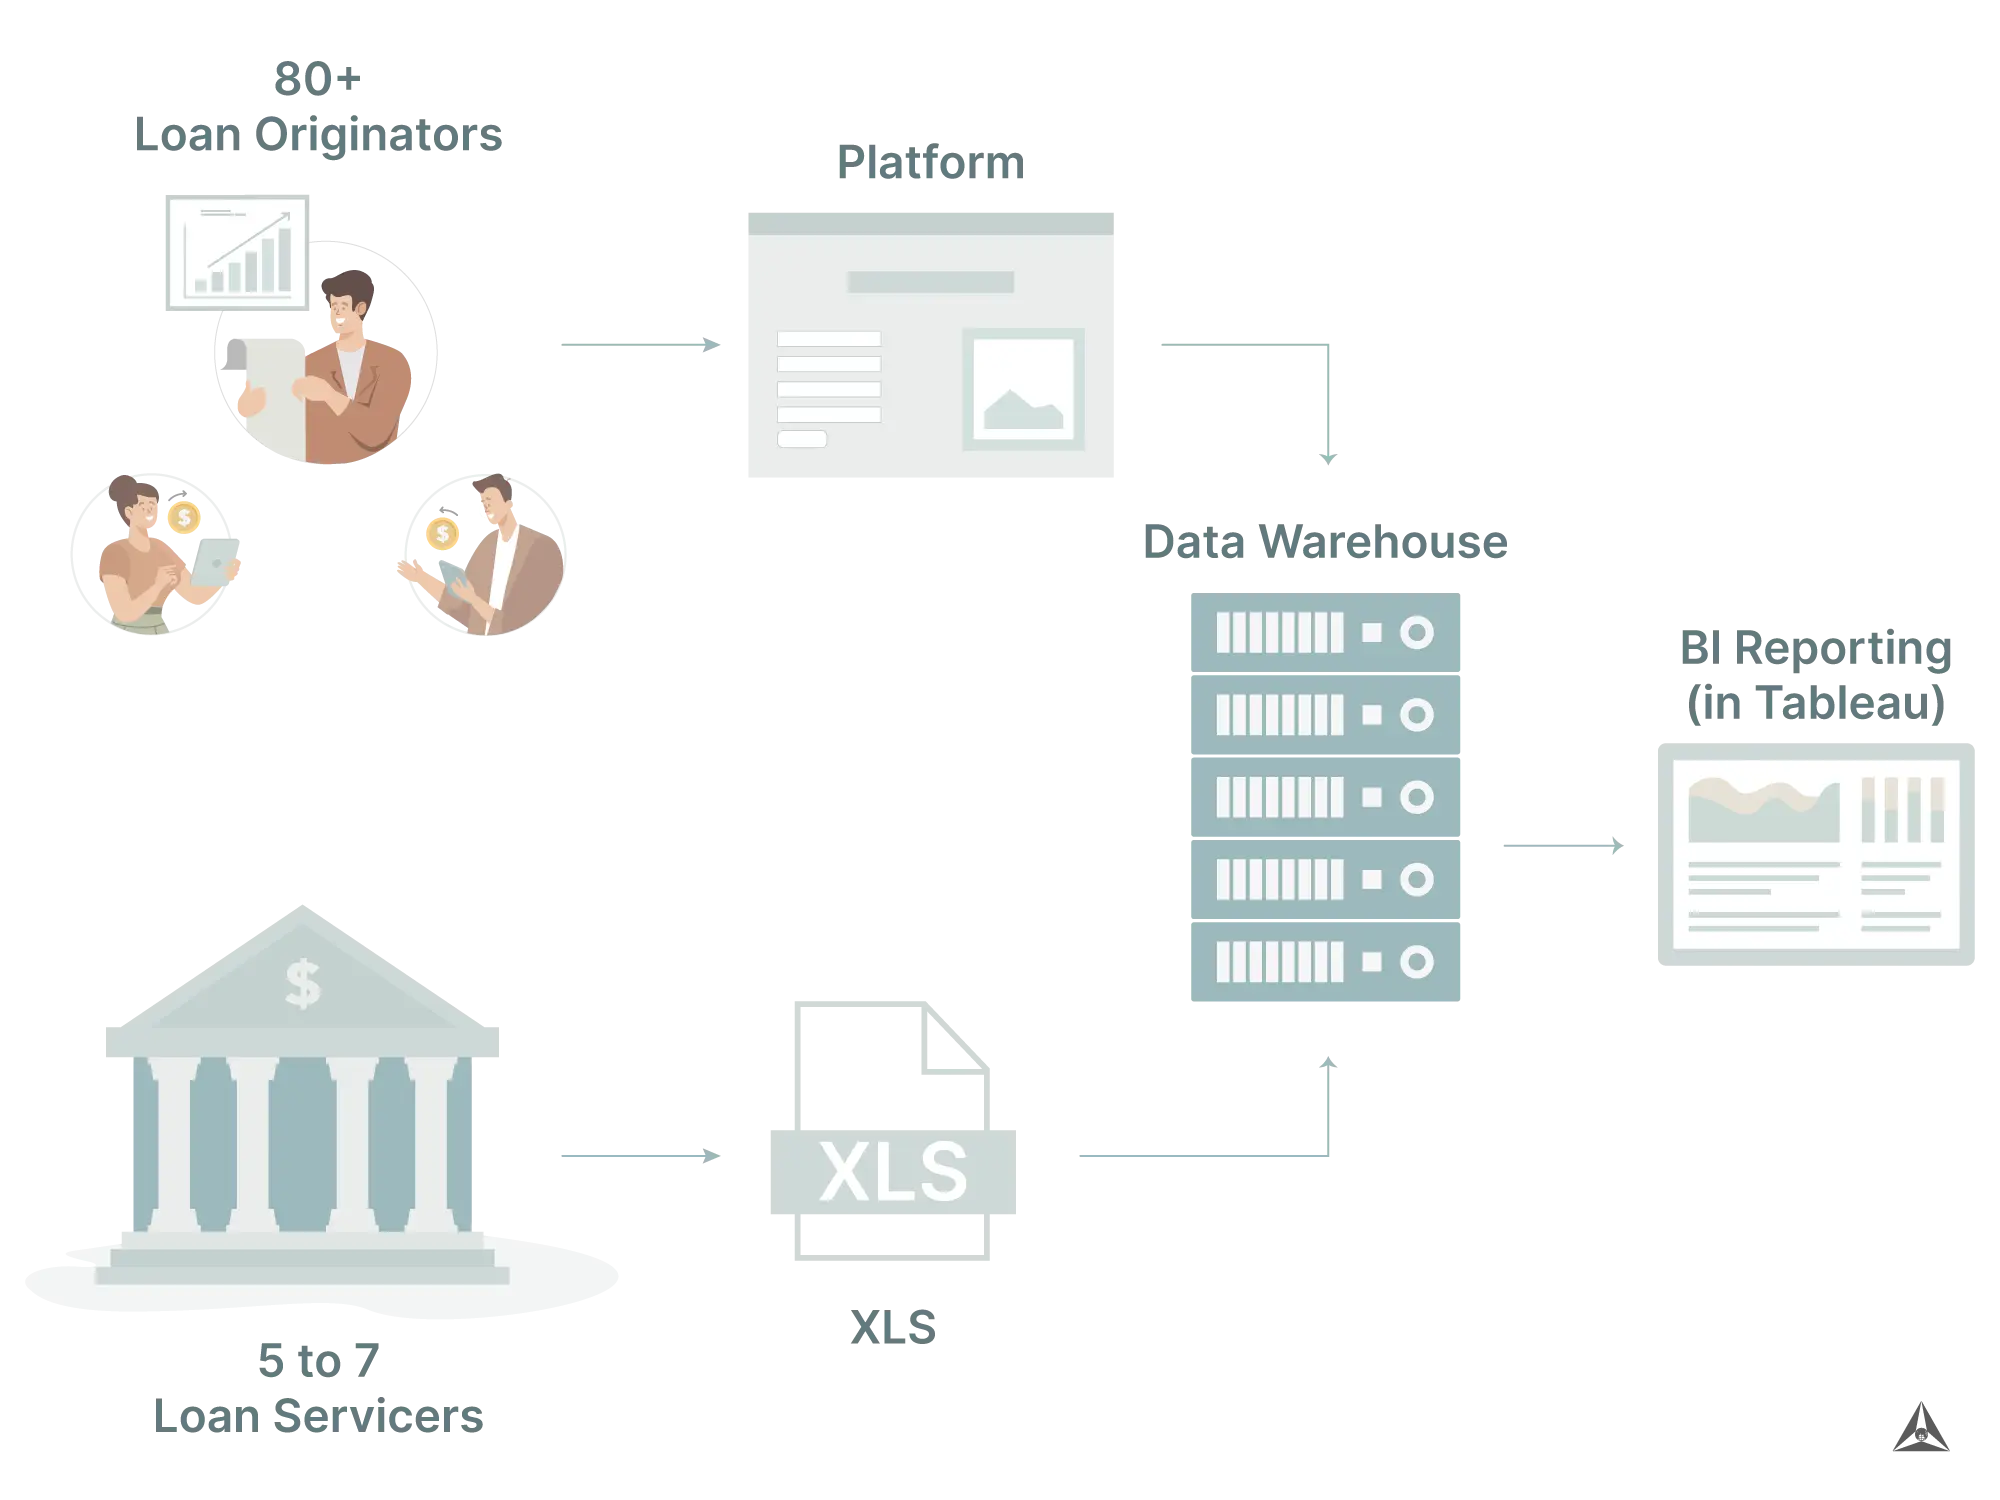 A diagram showing data from 80 loan originators and 5 to 7 loan servicers flowing from spreadsheets to a data warehouse and into Tableau reporting.